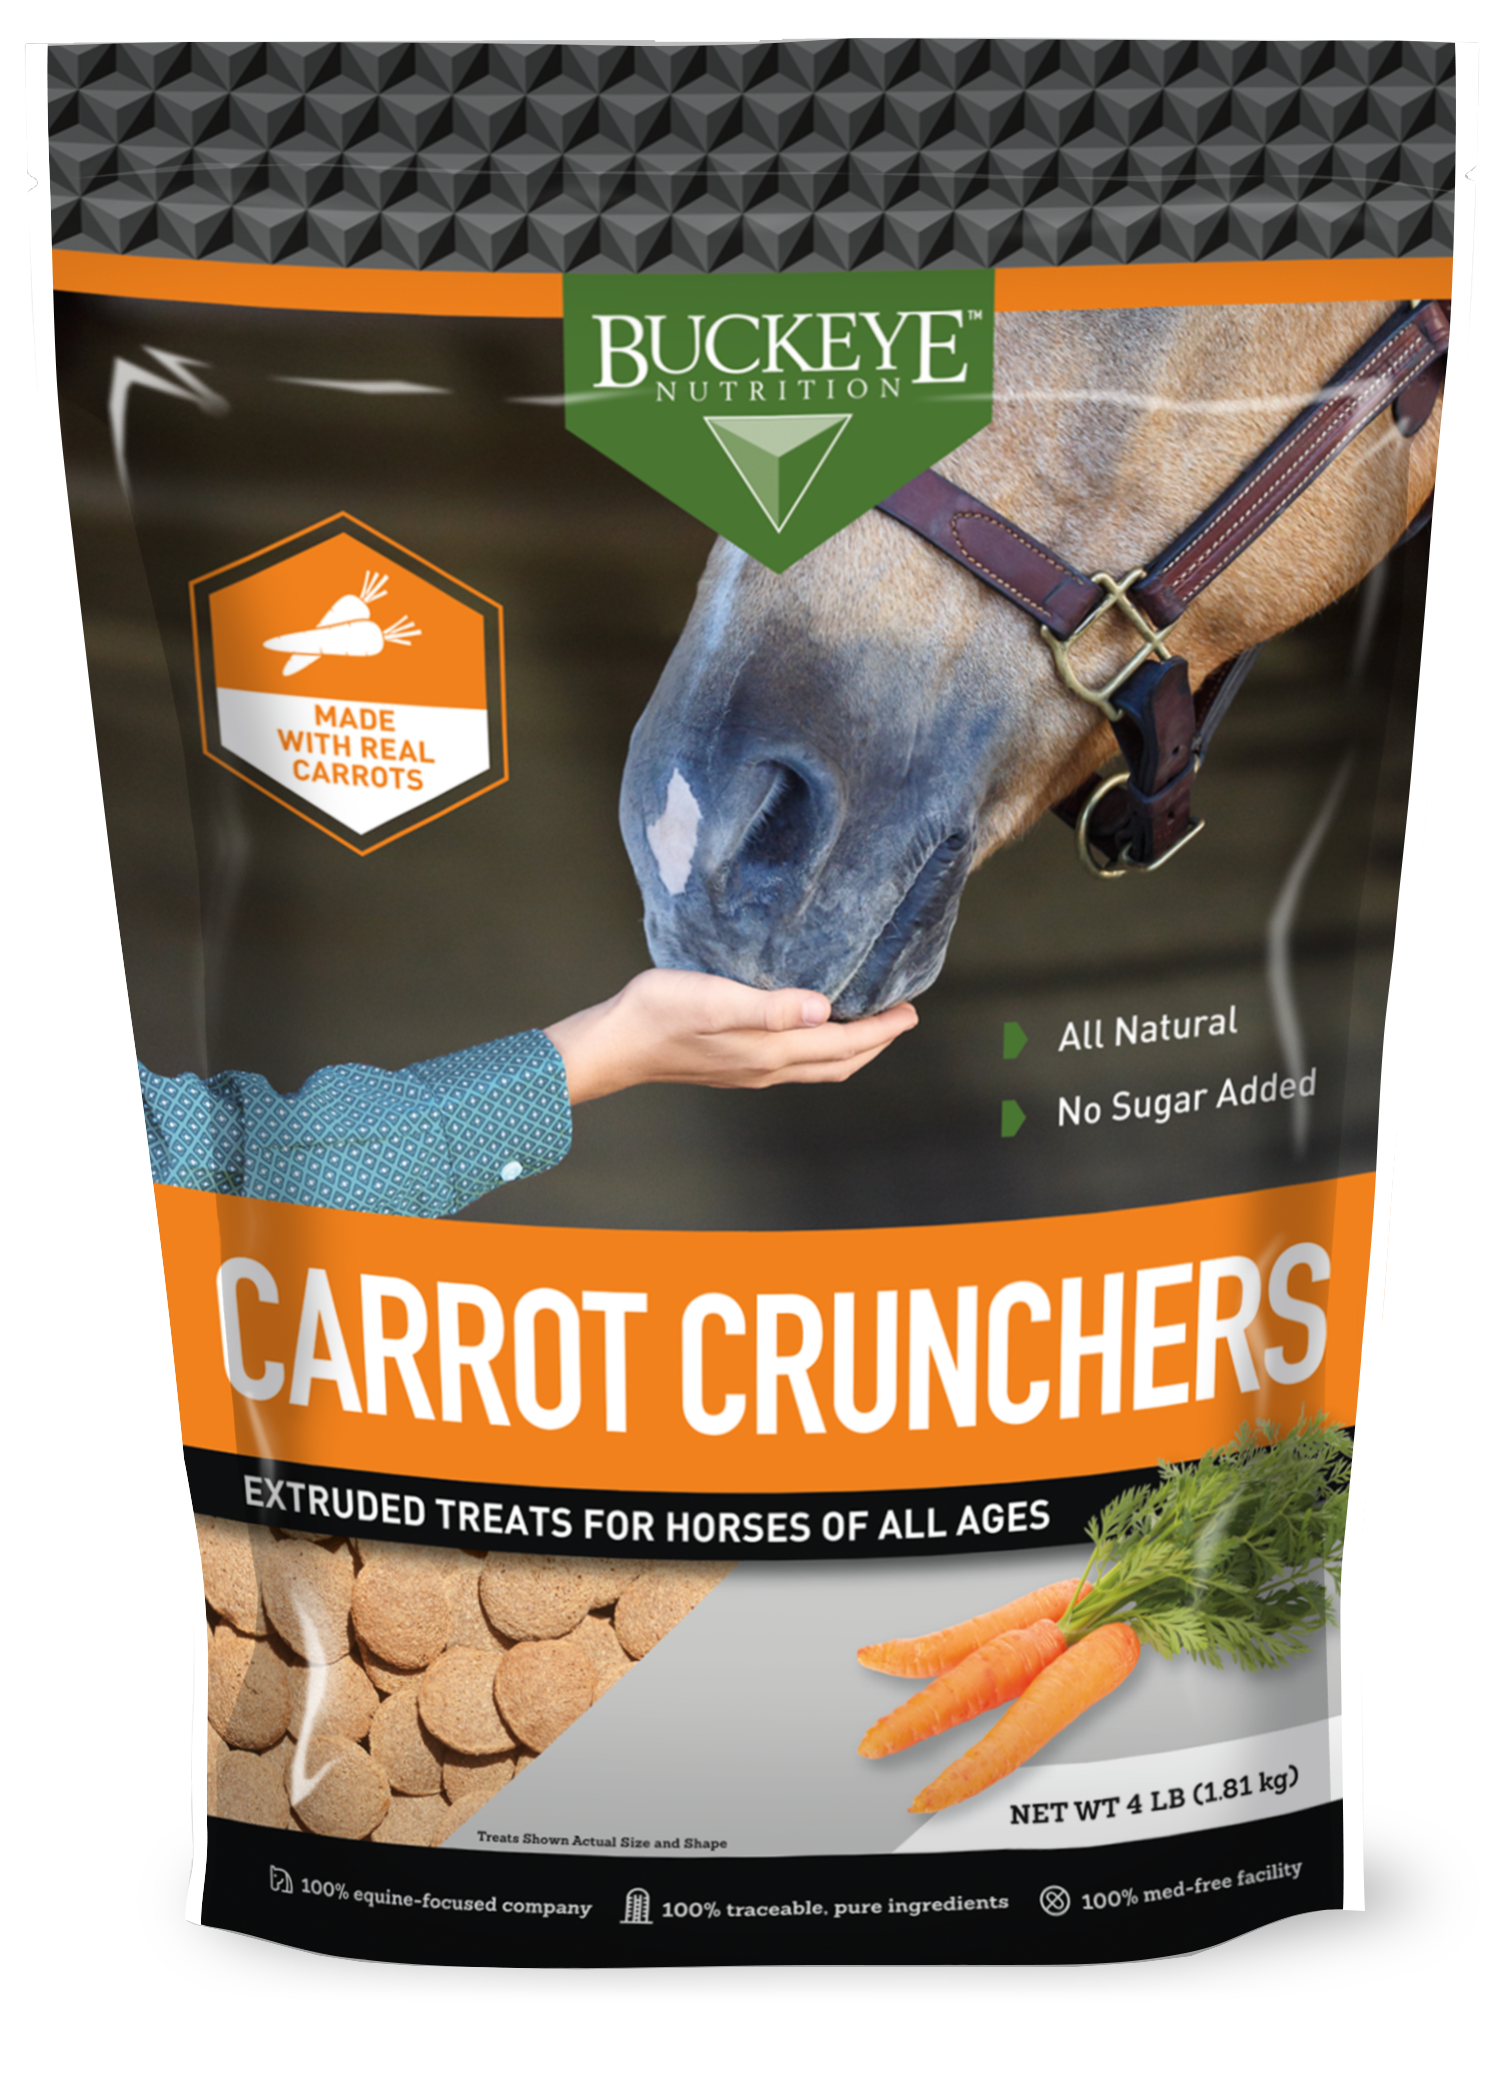 All Natural No Sugar Added Carrot Crunchers Treats image 1++